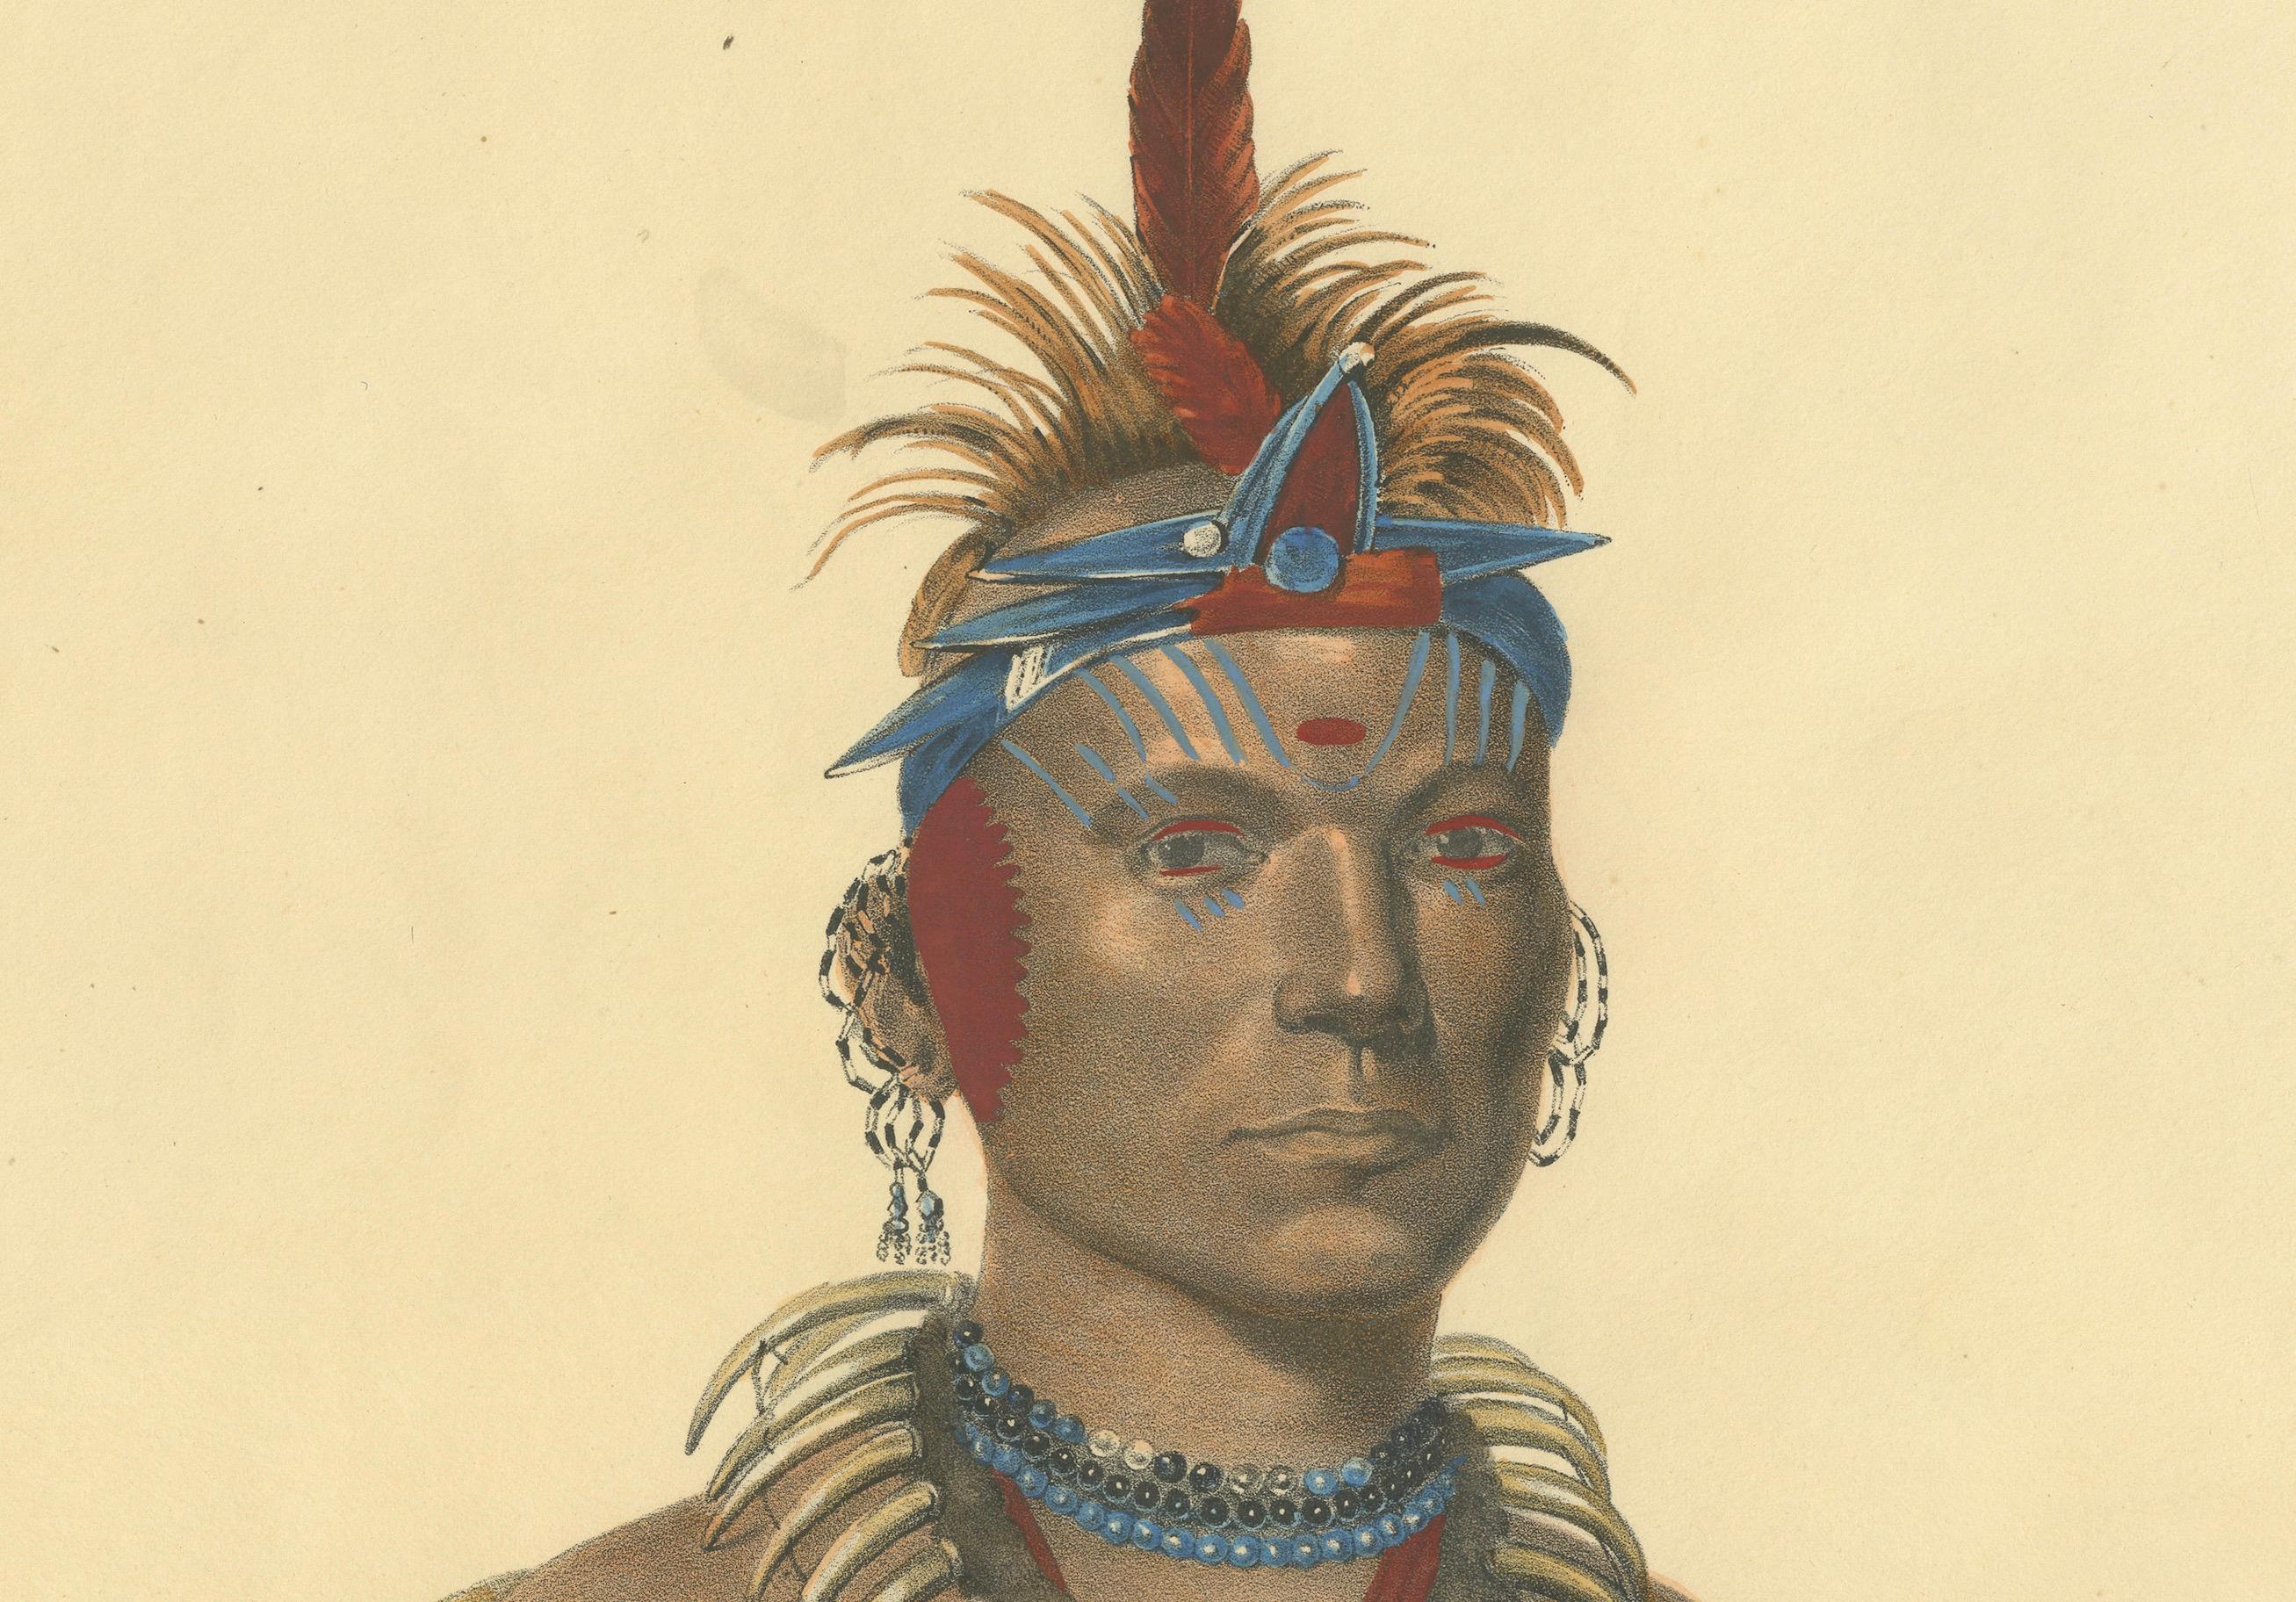 Steward of the Plains: Chono Ca Pe, An Otoe Chief

This is a hand-colored lithograph of Chono Ca Pe, an Otoe (often spelled Ottoe) Chief, taken from the 